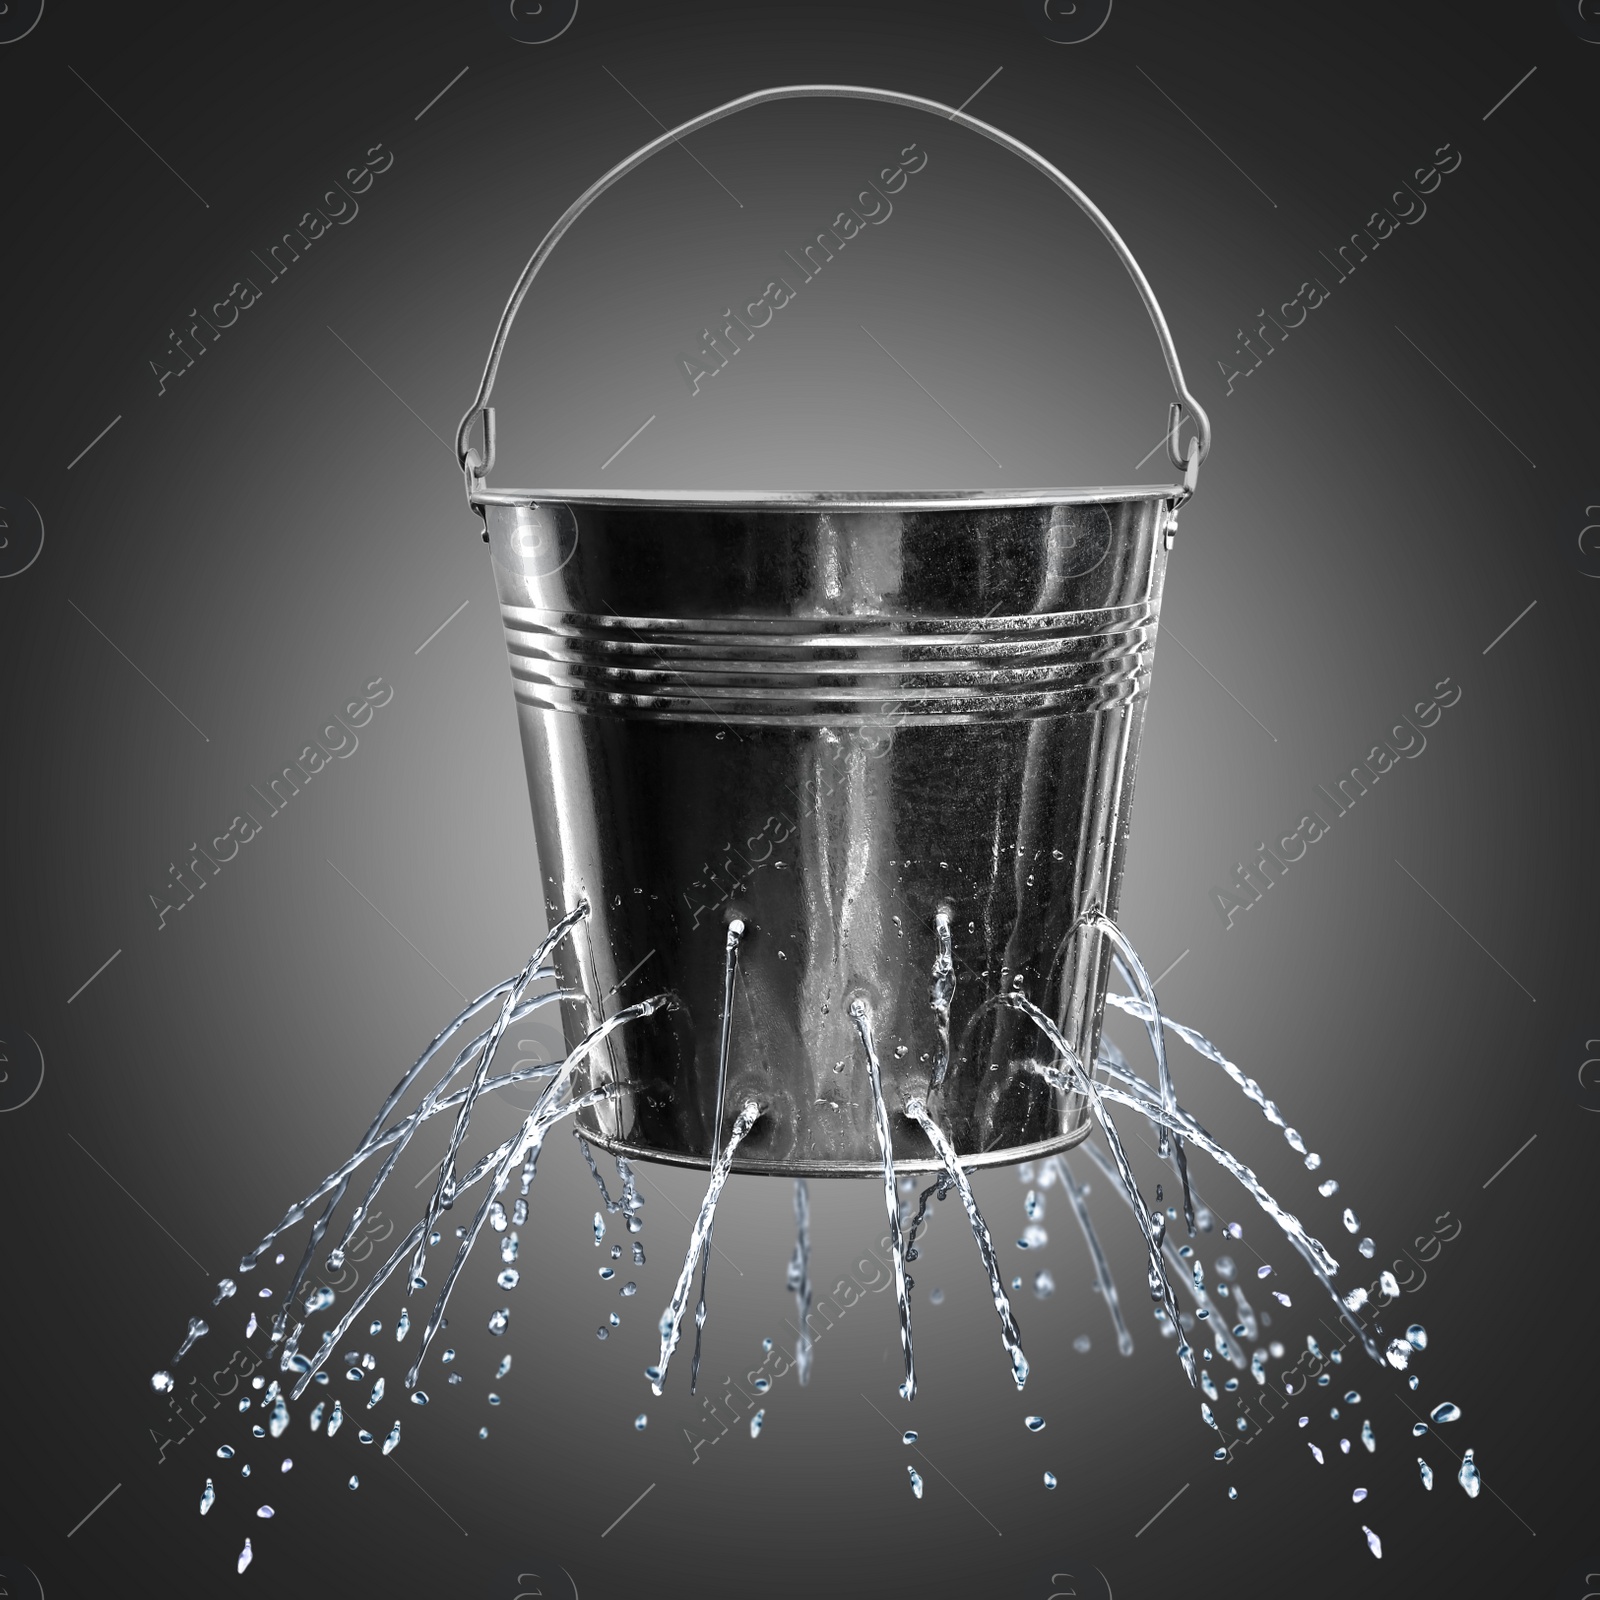 Image of Leaky bucket with water on dark background 